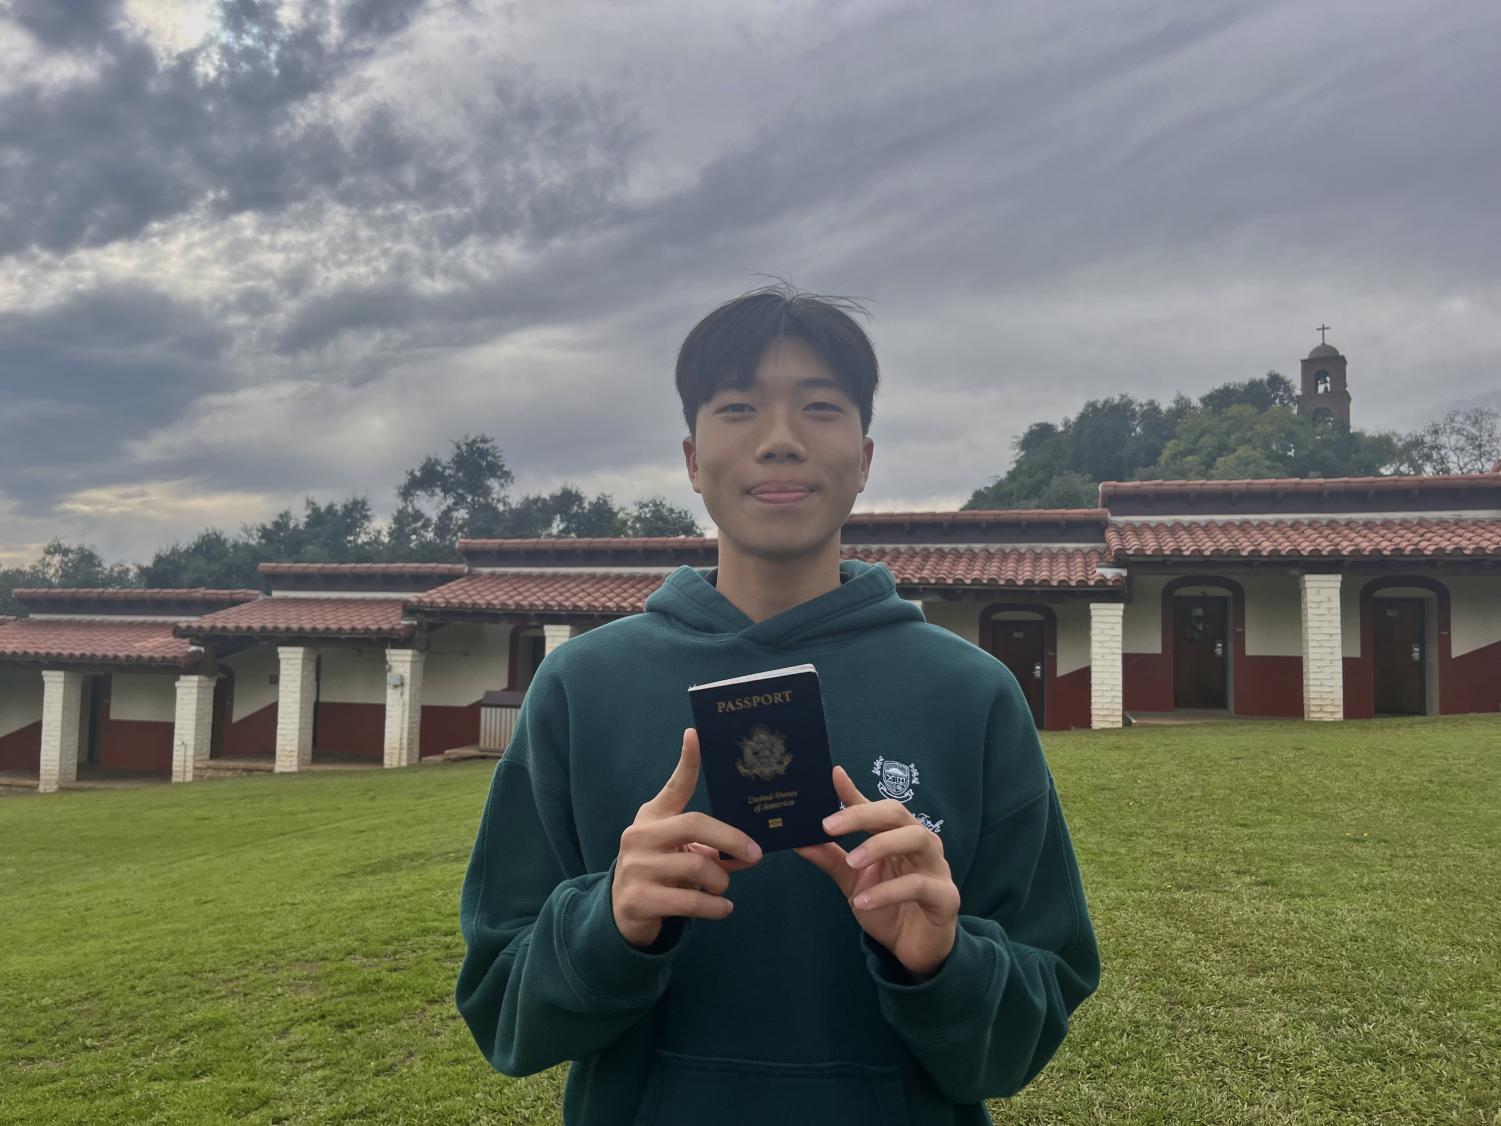 Standing in his dorm, Alamo, Daniel Hu (‘23) grins while holding up his American passport. A Shanghai native, Daniel has not been home since August 7th, 2021, which is also the last date he saw his dad and grandparents who live in China. This is due to the zero-Covid policy in China that has barred foreigners from entering China for the past two years without long quarantine requirements. Upon learning about the callback of China’s zero-Covid policy, Daniel booked a ticket back home for spring break, ecstatic to finally be able to use his passport.